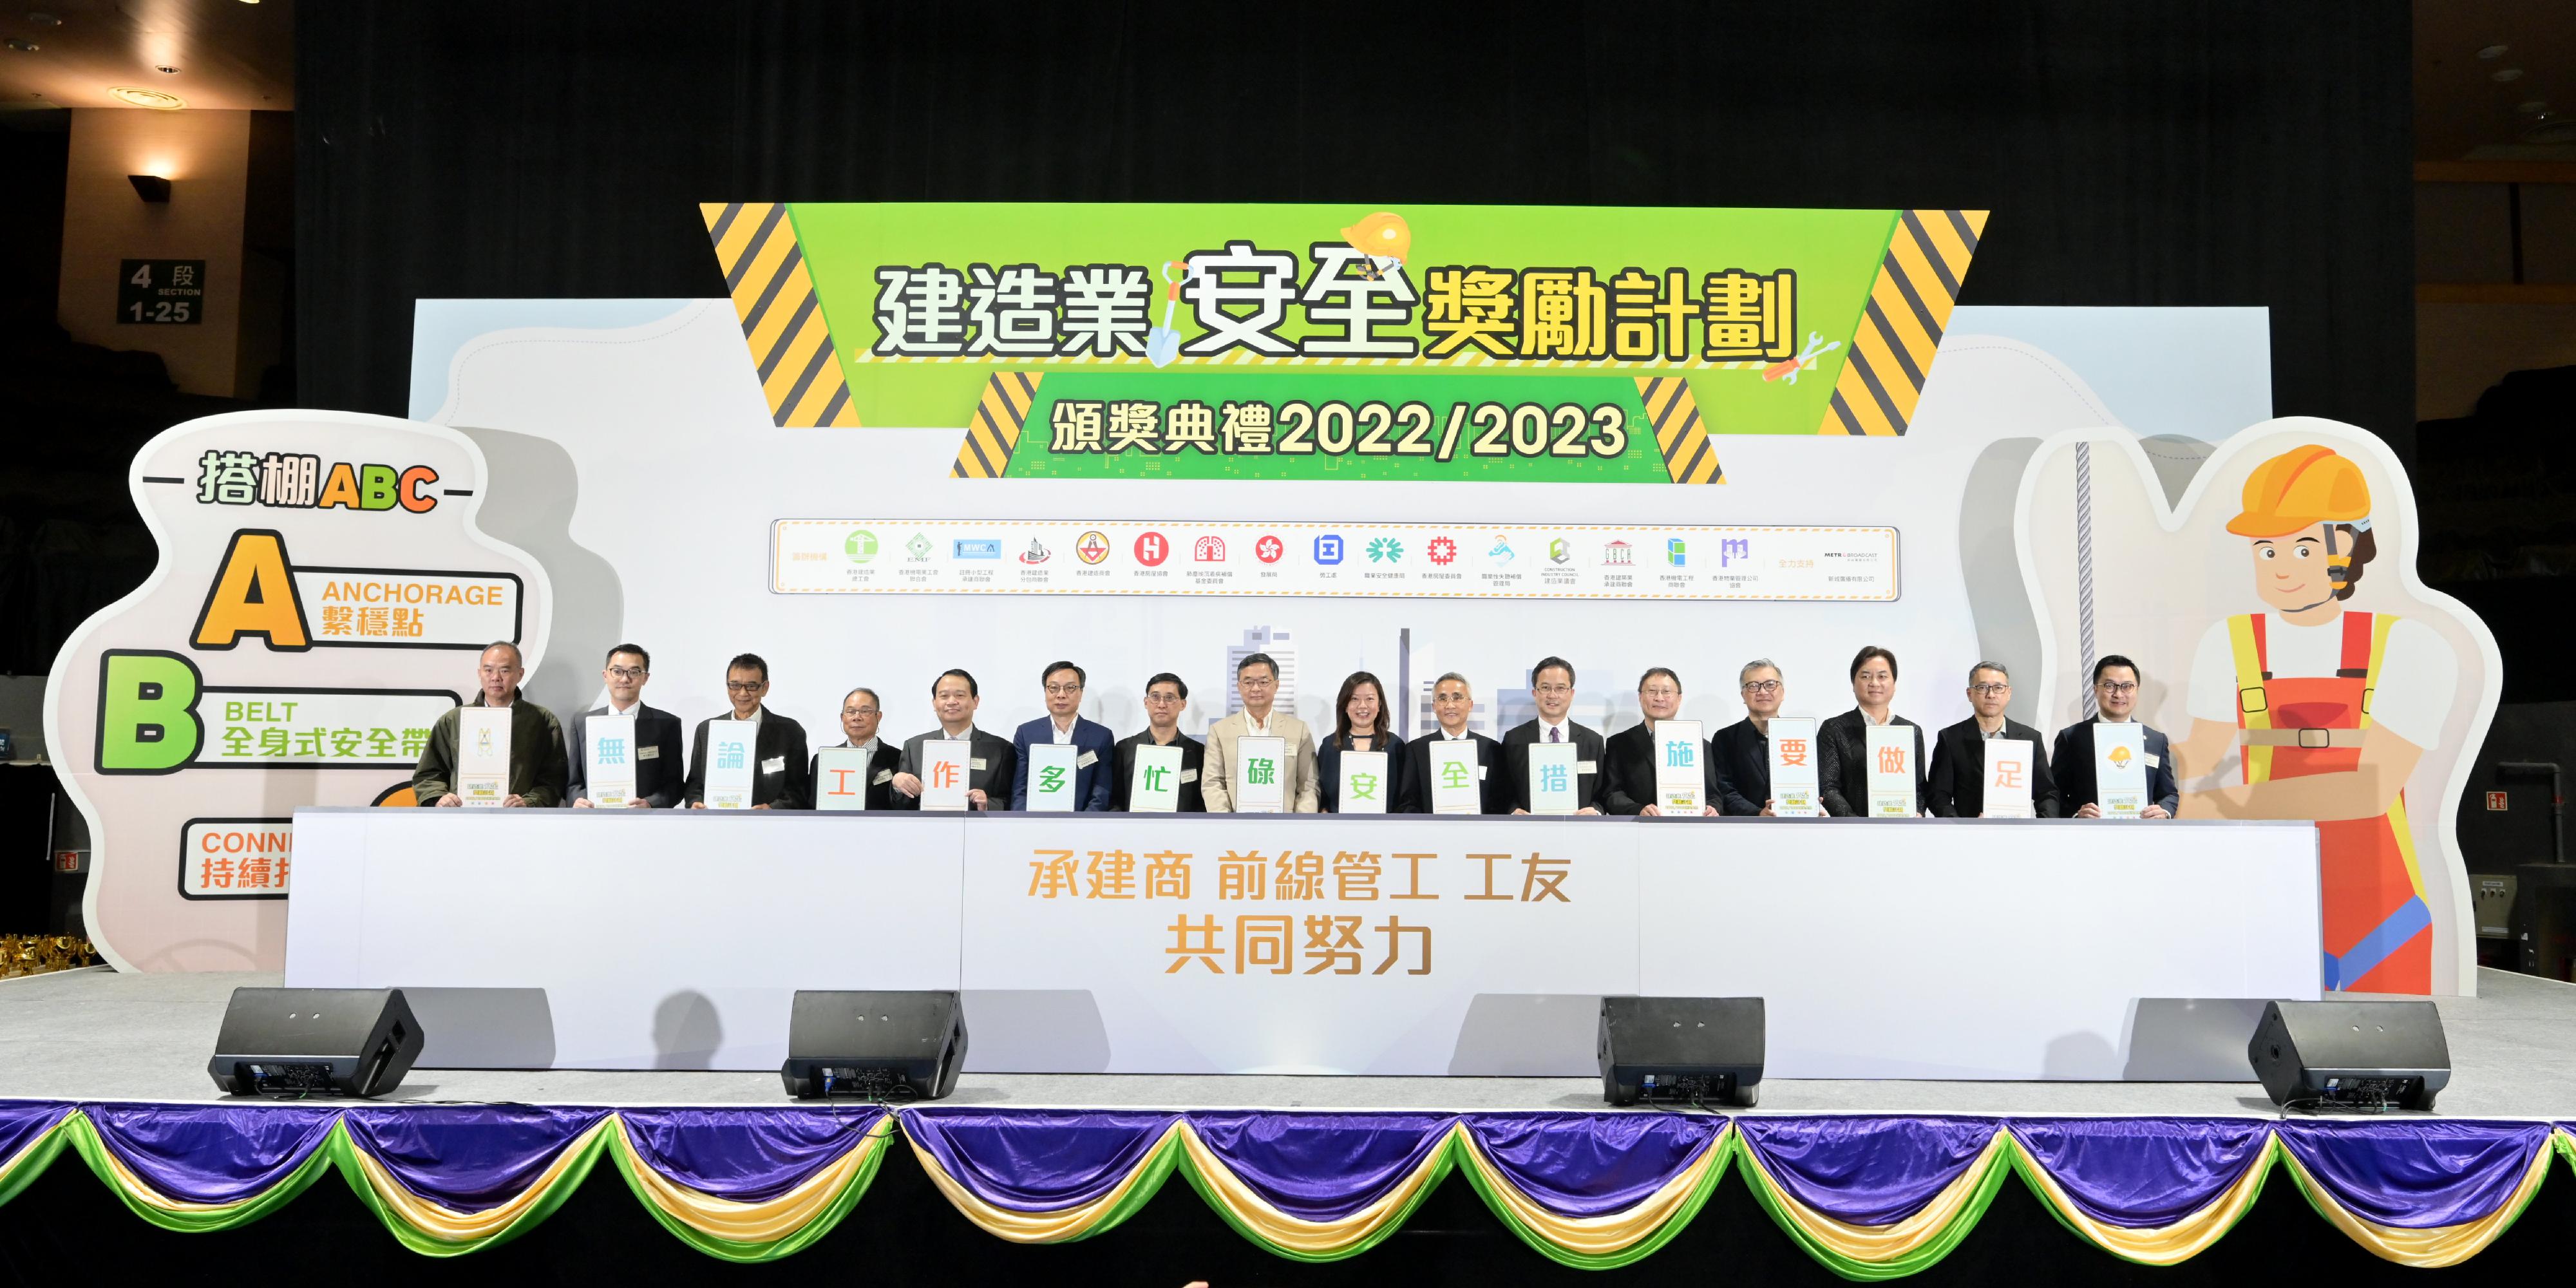 The Award Presentation Ceremony of the Construction Industry Safety Award Scheme was held at MacPherson Stadium in Mong Kok today (March 26). Photo shows the Commissioner for Labour, Ms May Chan (eighth right); Legislative Council Member Mr Louis Loong (eighth left); the Chairman of the Occupational Safety and Health Council, Dr Alan Chan (seventh right); the Chairman of the Occupational Deafness Compensation Board, Dr Thomas Tsang (fifth right), and other guests officiating at the ceremony.